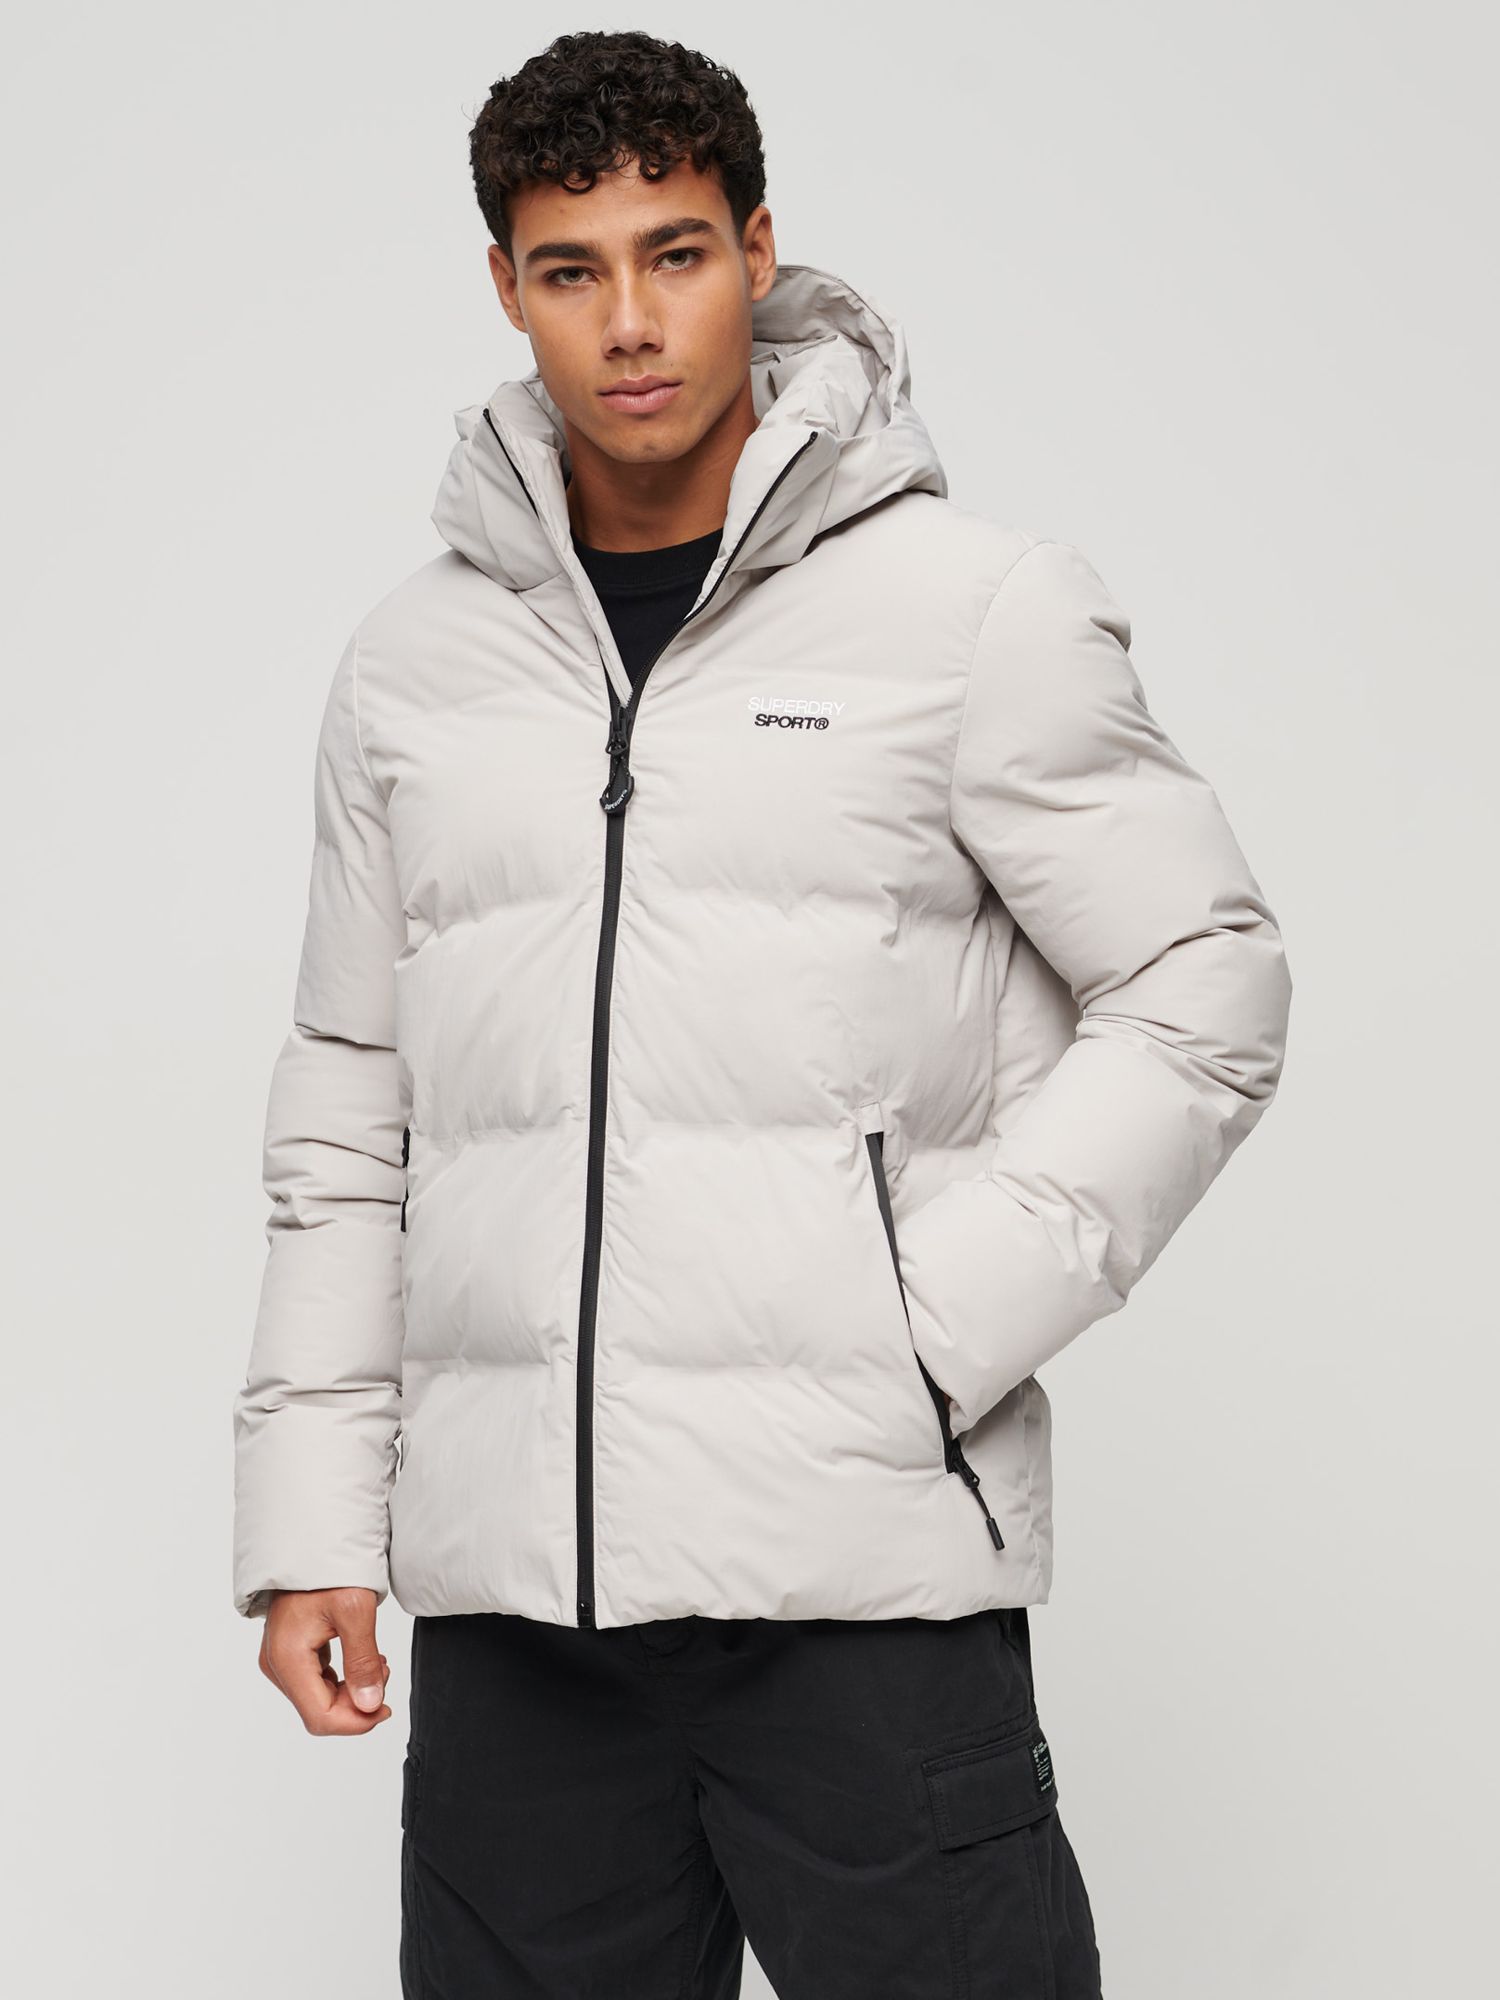 Grey Moonlight Puffer John Jacket, at Hooded Partners Lewis Superdry & Boxy